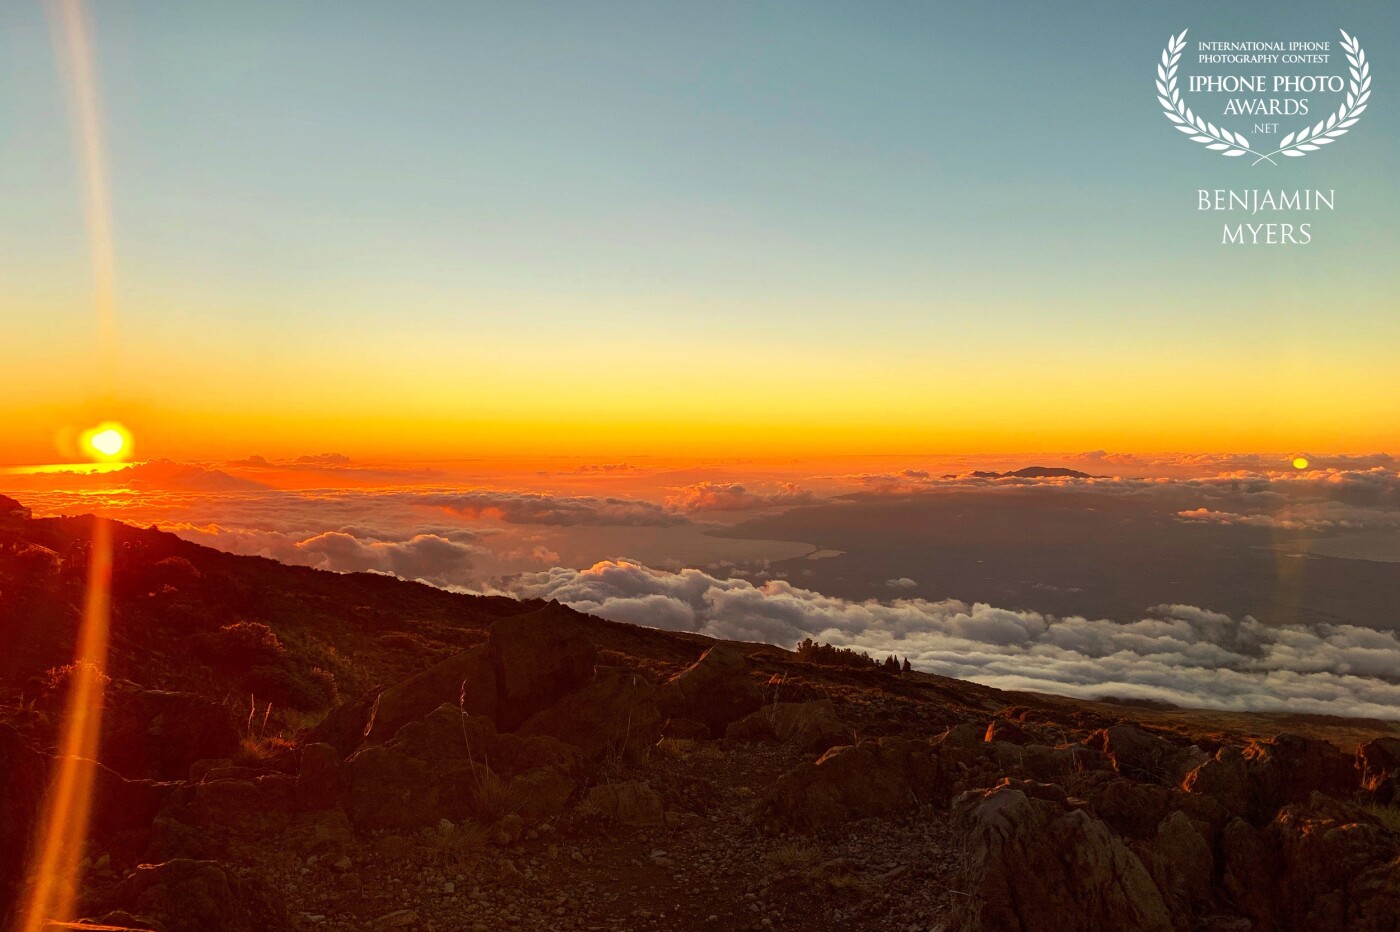 It is amazing how long it takes for the sun to set when you have an unobstructed view from 10,000 feet down to sea level.  We were atop Haleakala watching the sunset, just mesmerized by the view. I was unprepared for the drop in temperature. It was 42 degrees by the time we left in the dark. 